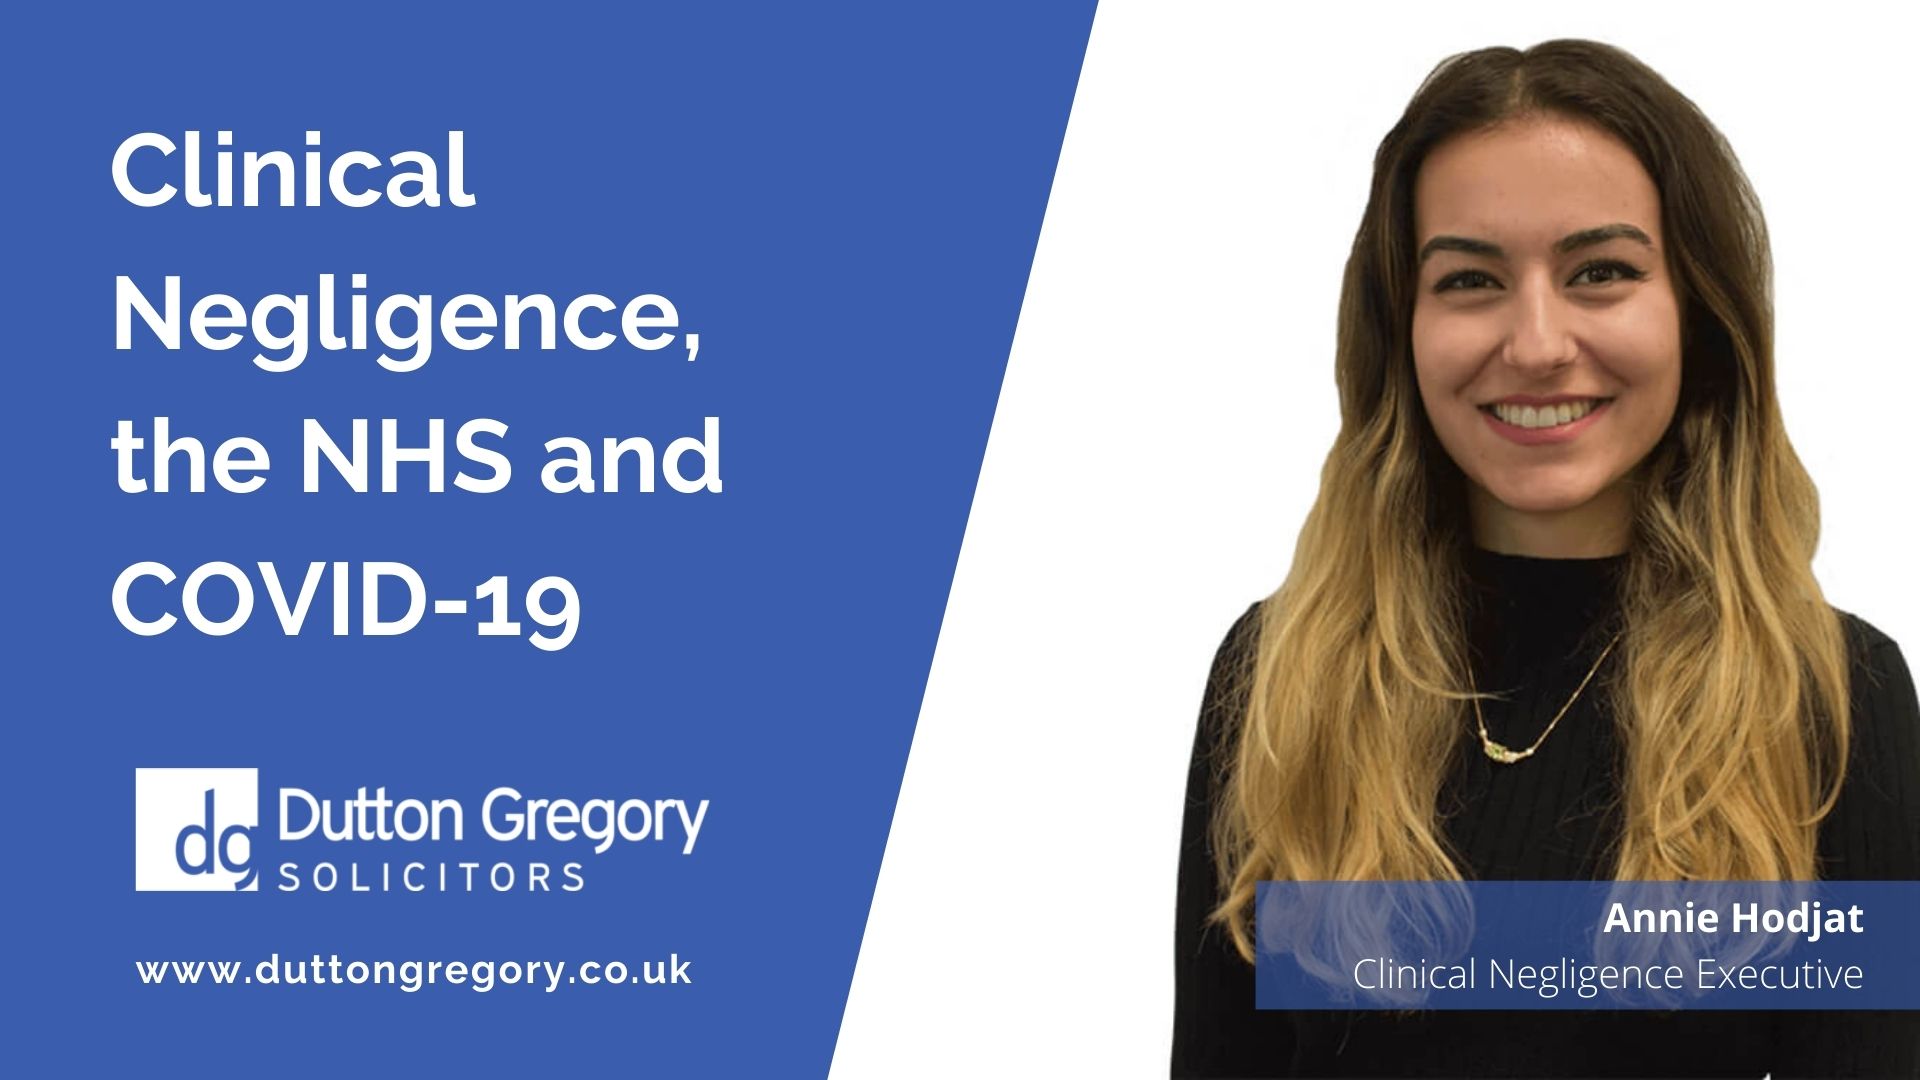 Clinical Negligence, the NHS and COVID-19